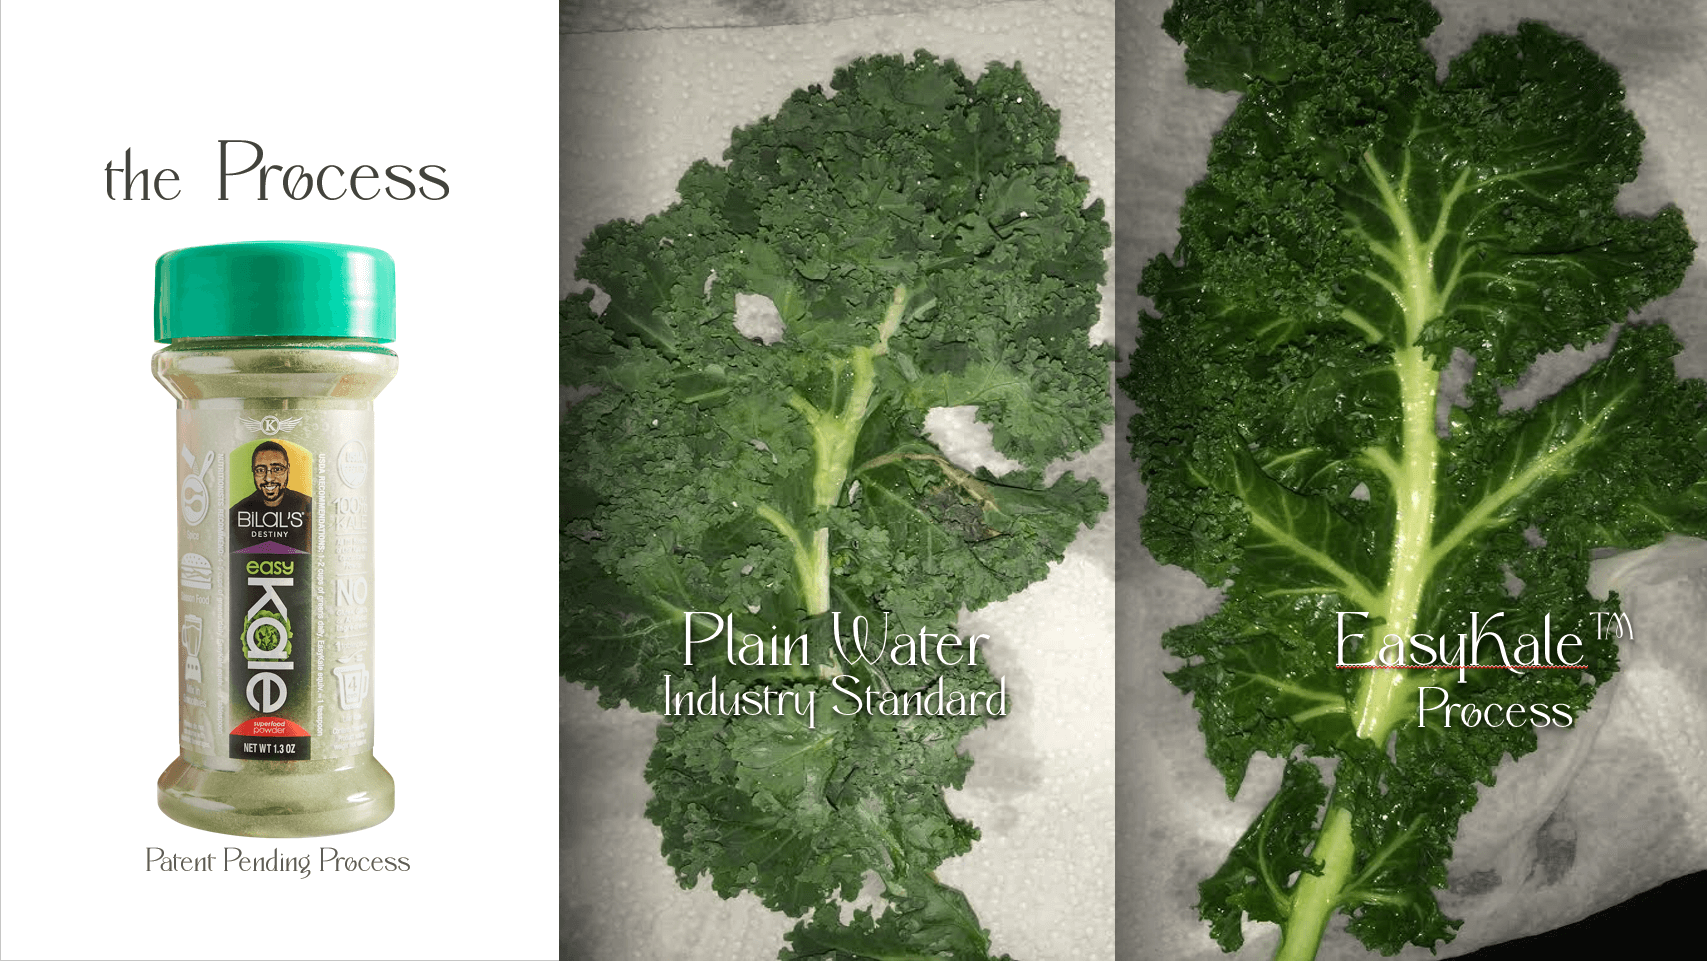 PowerPoint slide from Bilal Qizilbash's 2021 VQuad presentation comparing two kale samples on the right,one is plain water industry standard the other is EasyKale processed kale and on the left there is easykale shaker.